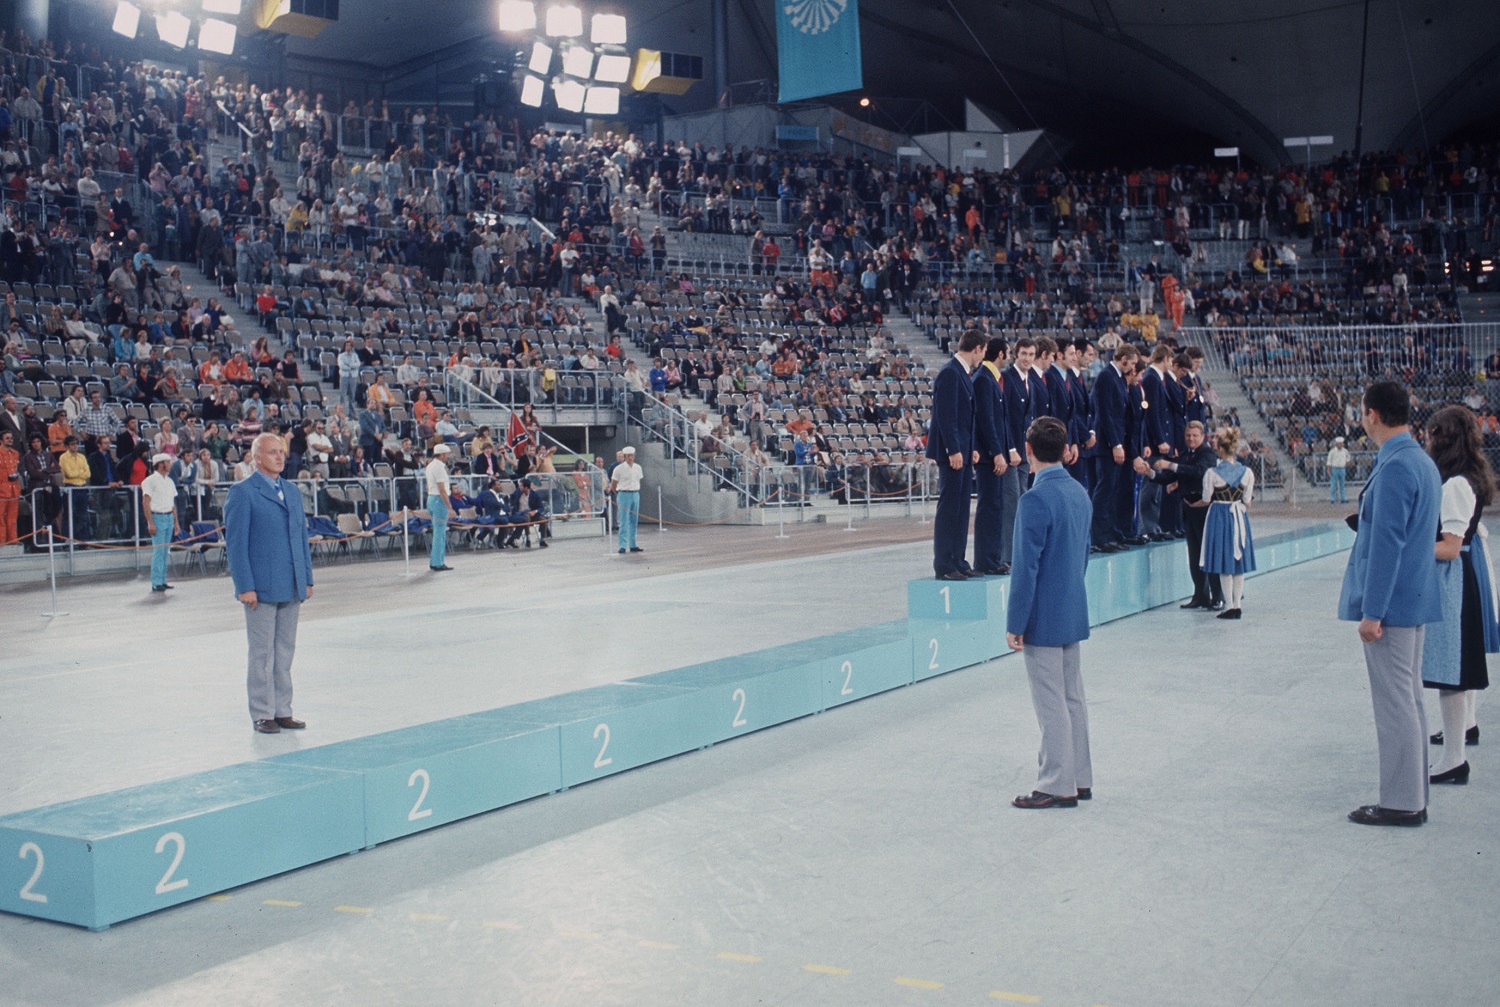 During the 1972 Munich Olympics medal ceremony for the basketball competition, the second-place podium remained empty as Team USA protested the decision to give the gold to the Soviet Union.